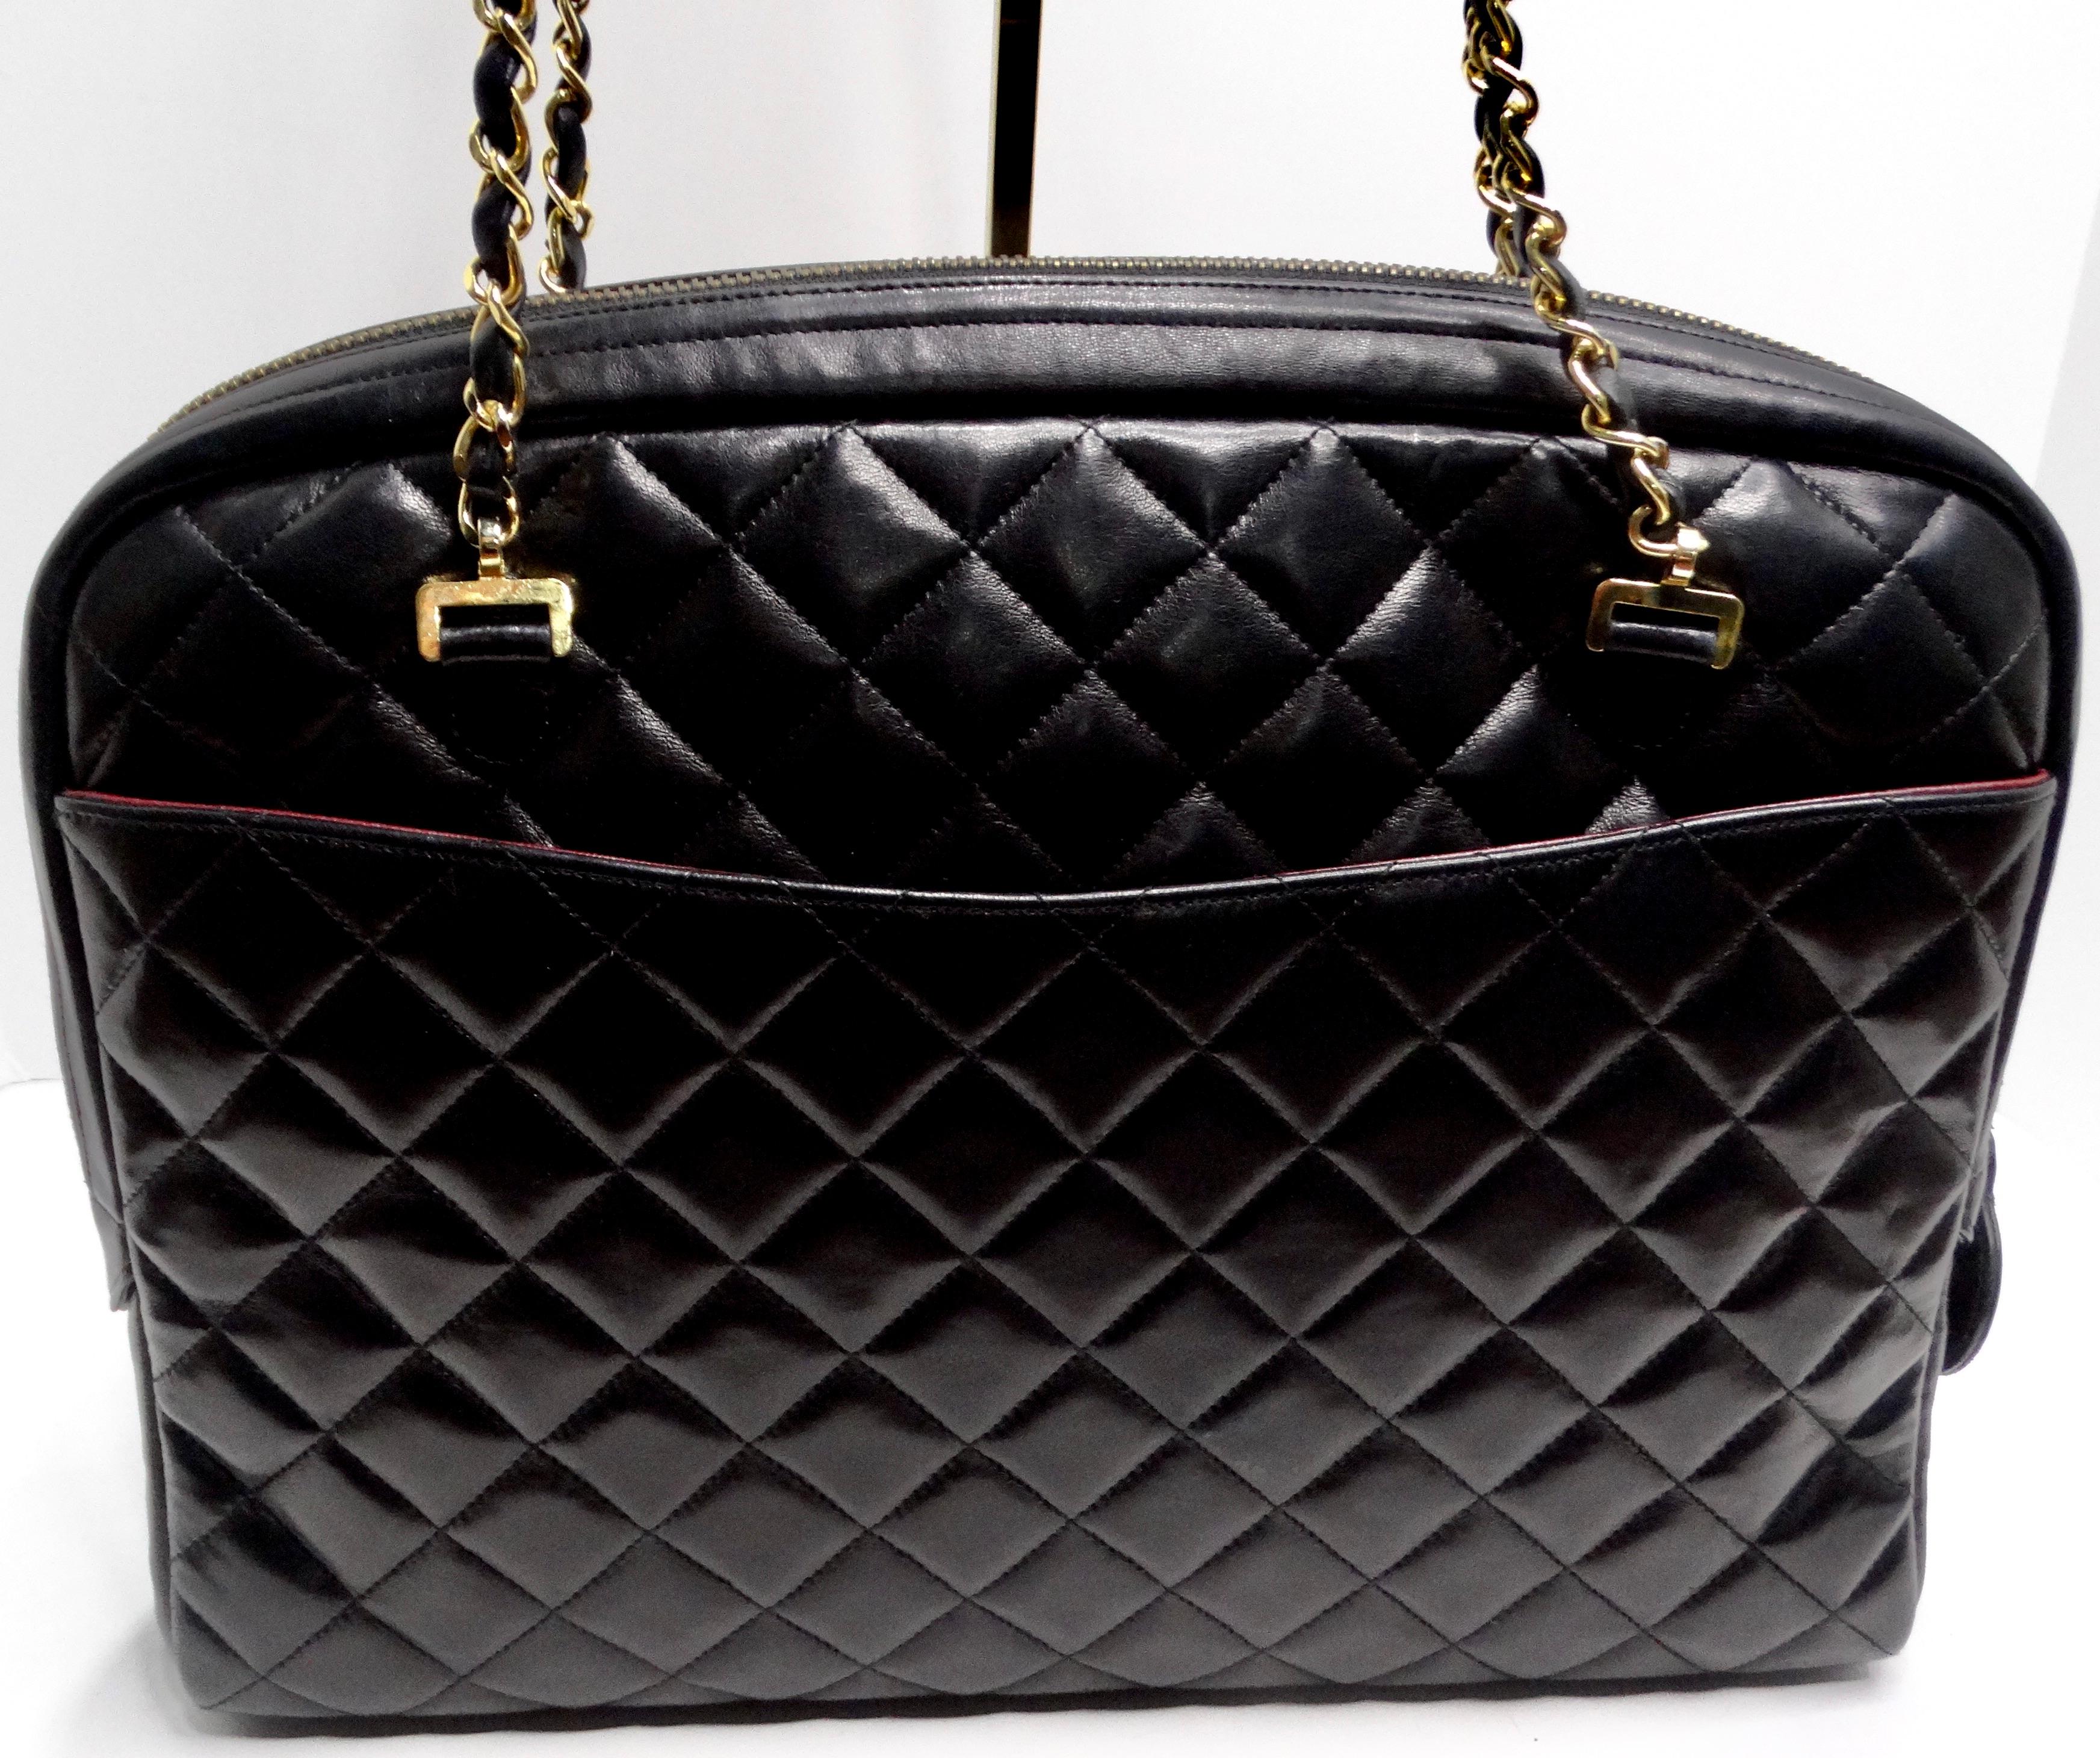 Chanel 1980s Black Quilted Lambskin Camera Bag For Sale 1